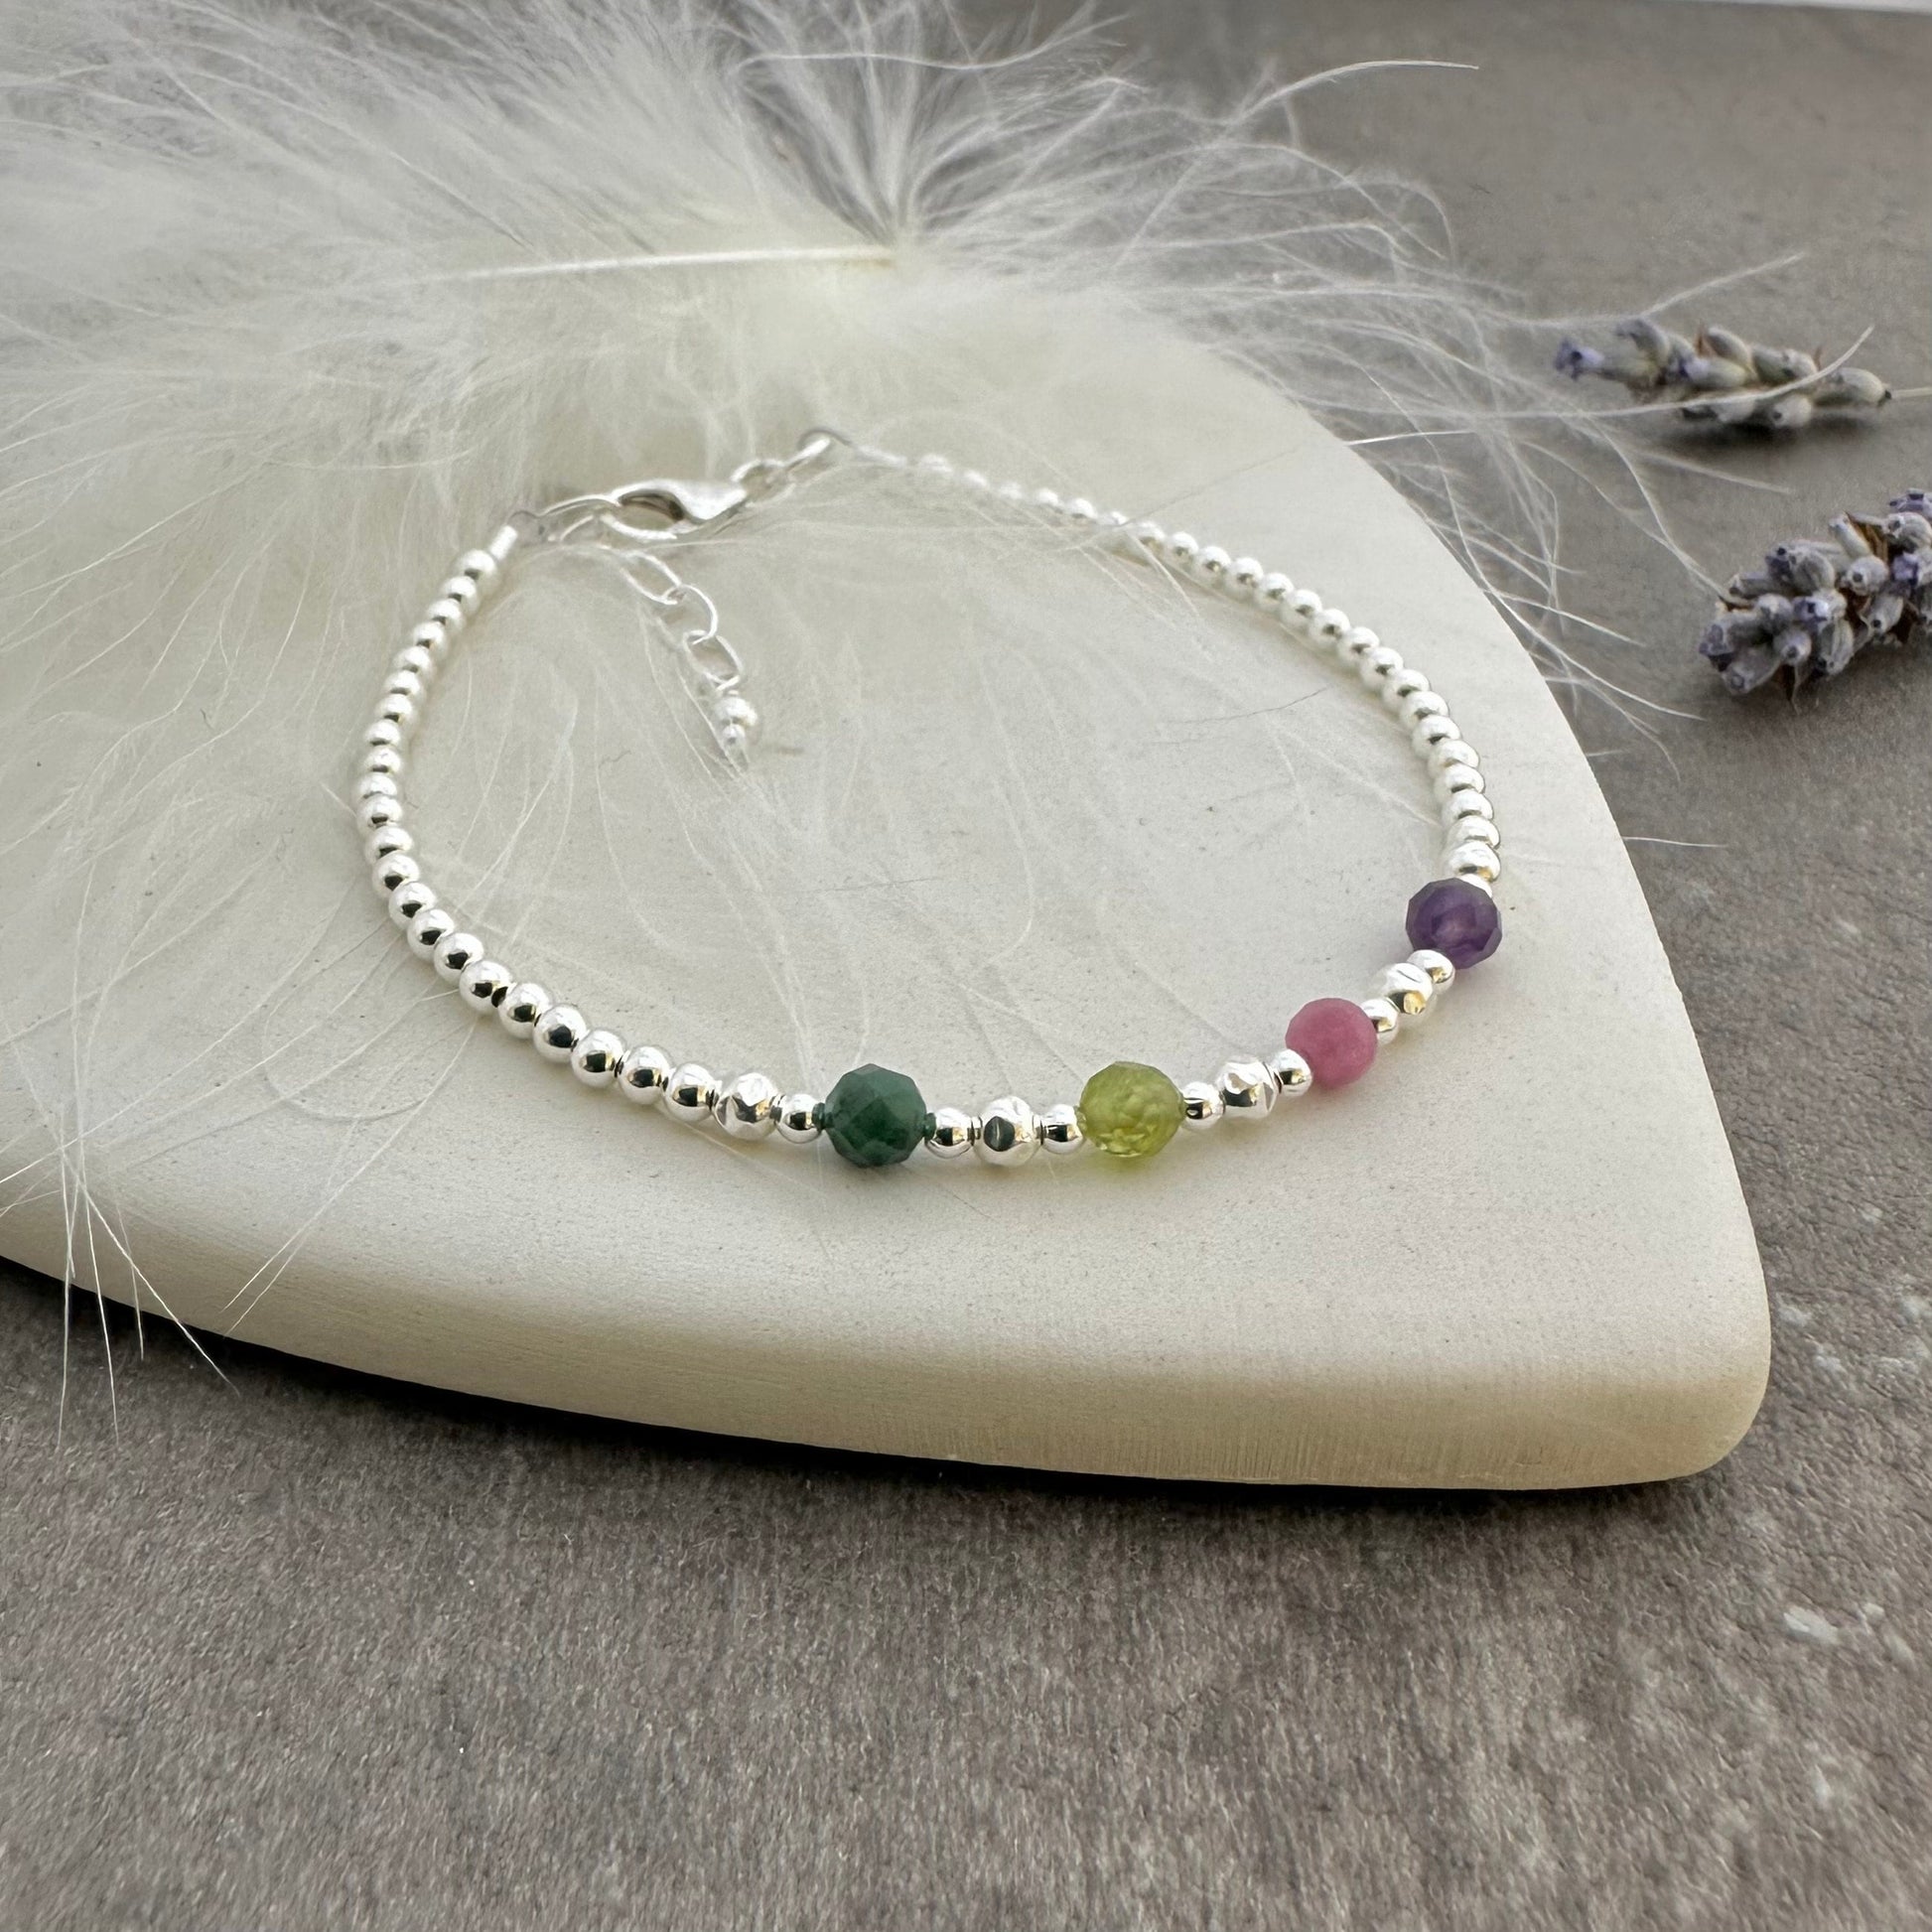 Birthstones Bracelet for Mum, meaningful gift for Mothering Sunday, nft, family birthstone jewellery in 2.5mm sterling silver